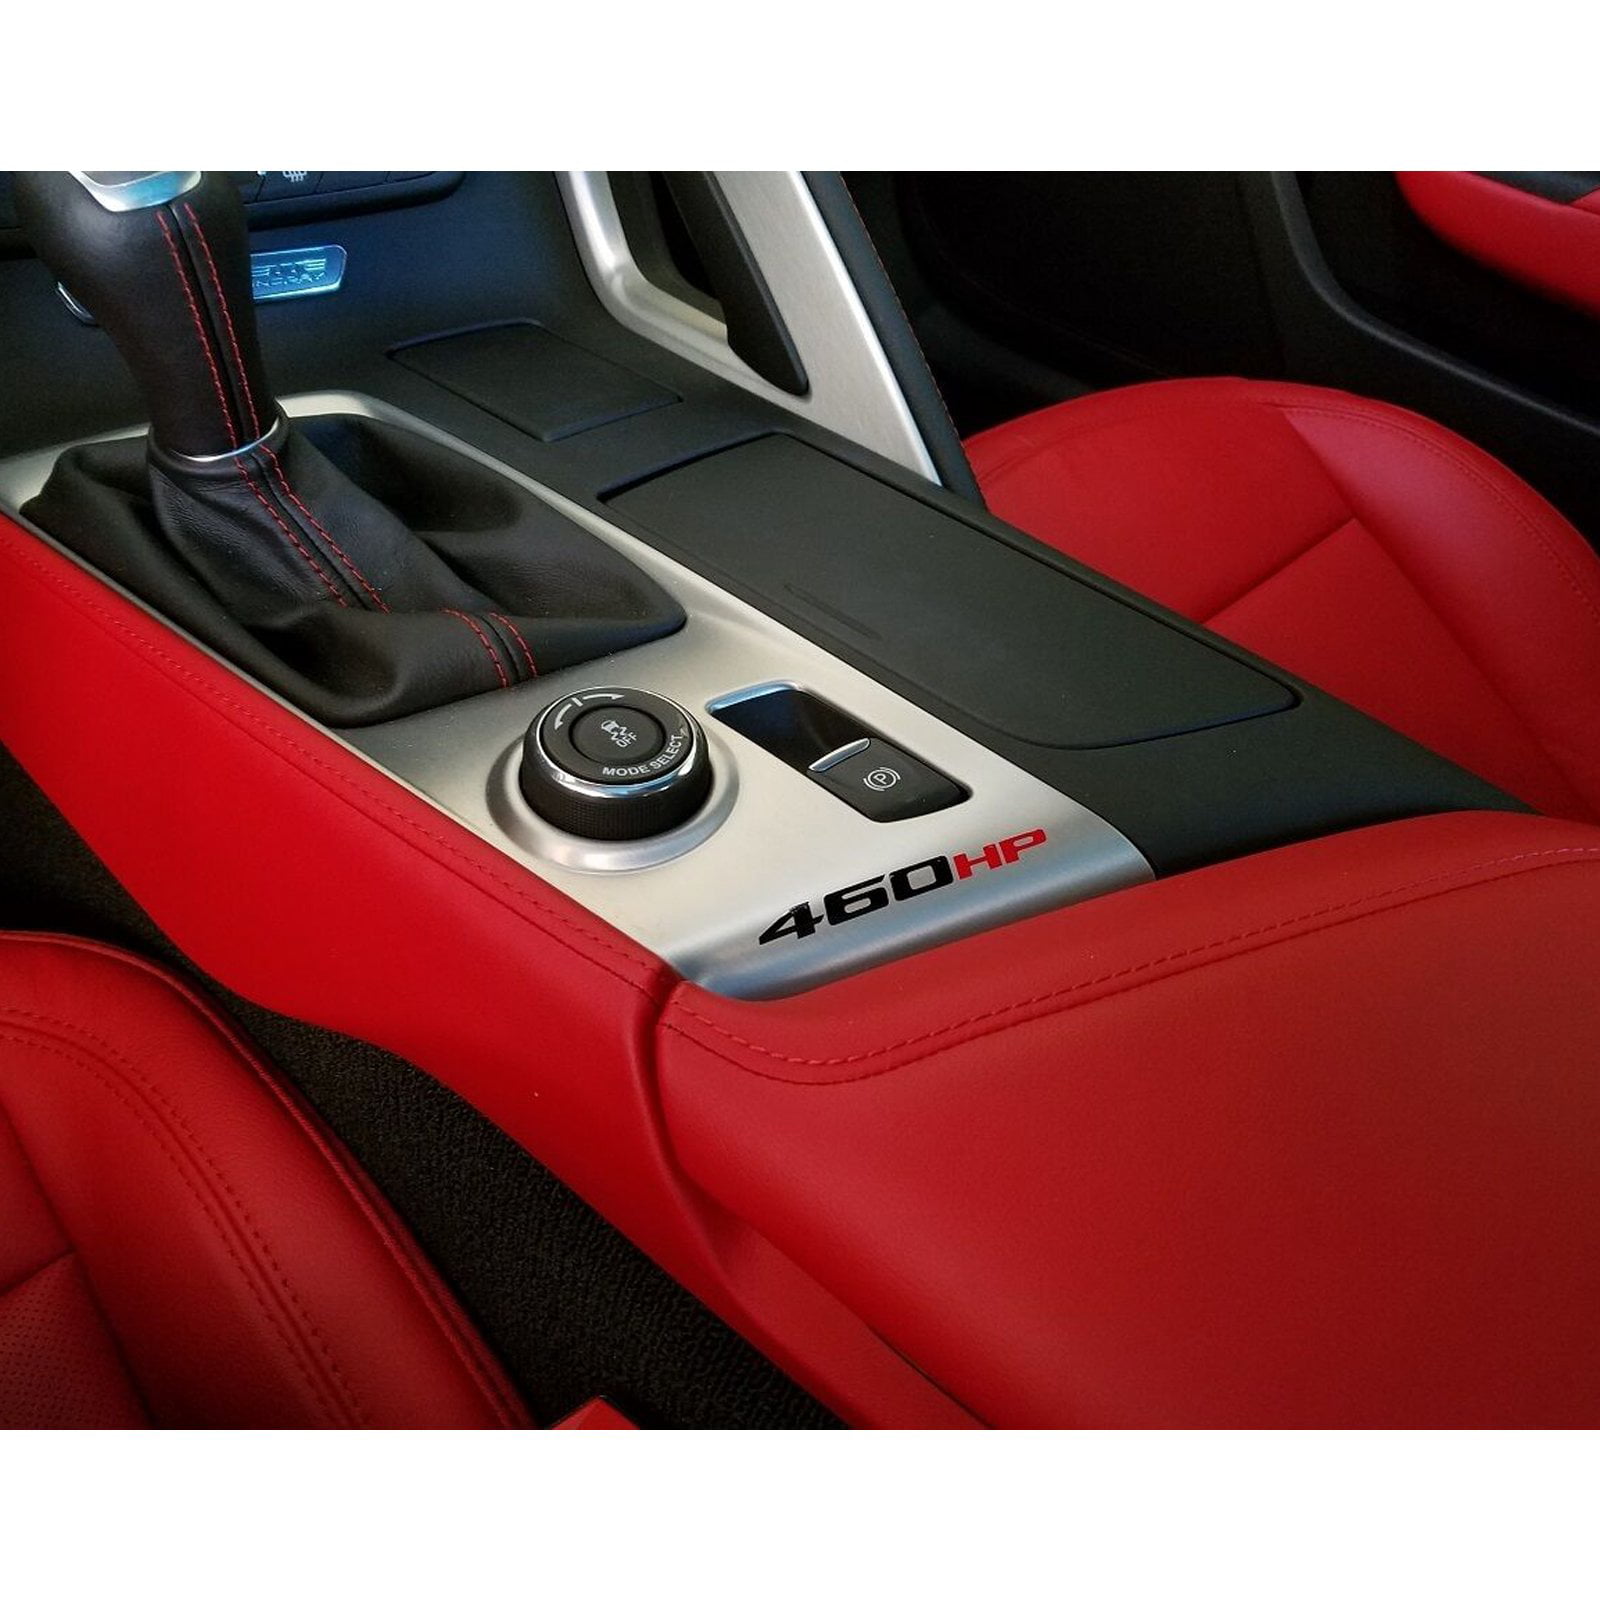 5x ///M Performance Sticker for leather seats and other flat and smooth surfaces 